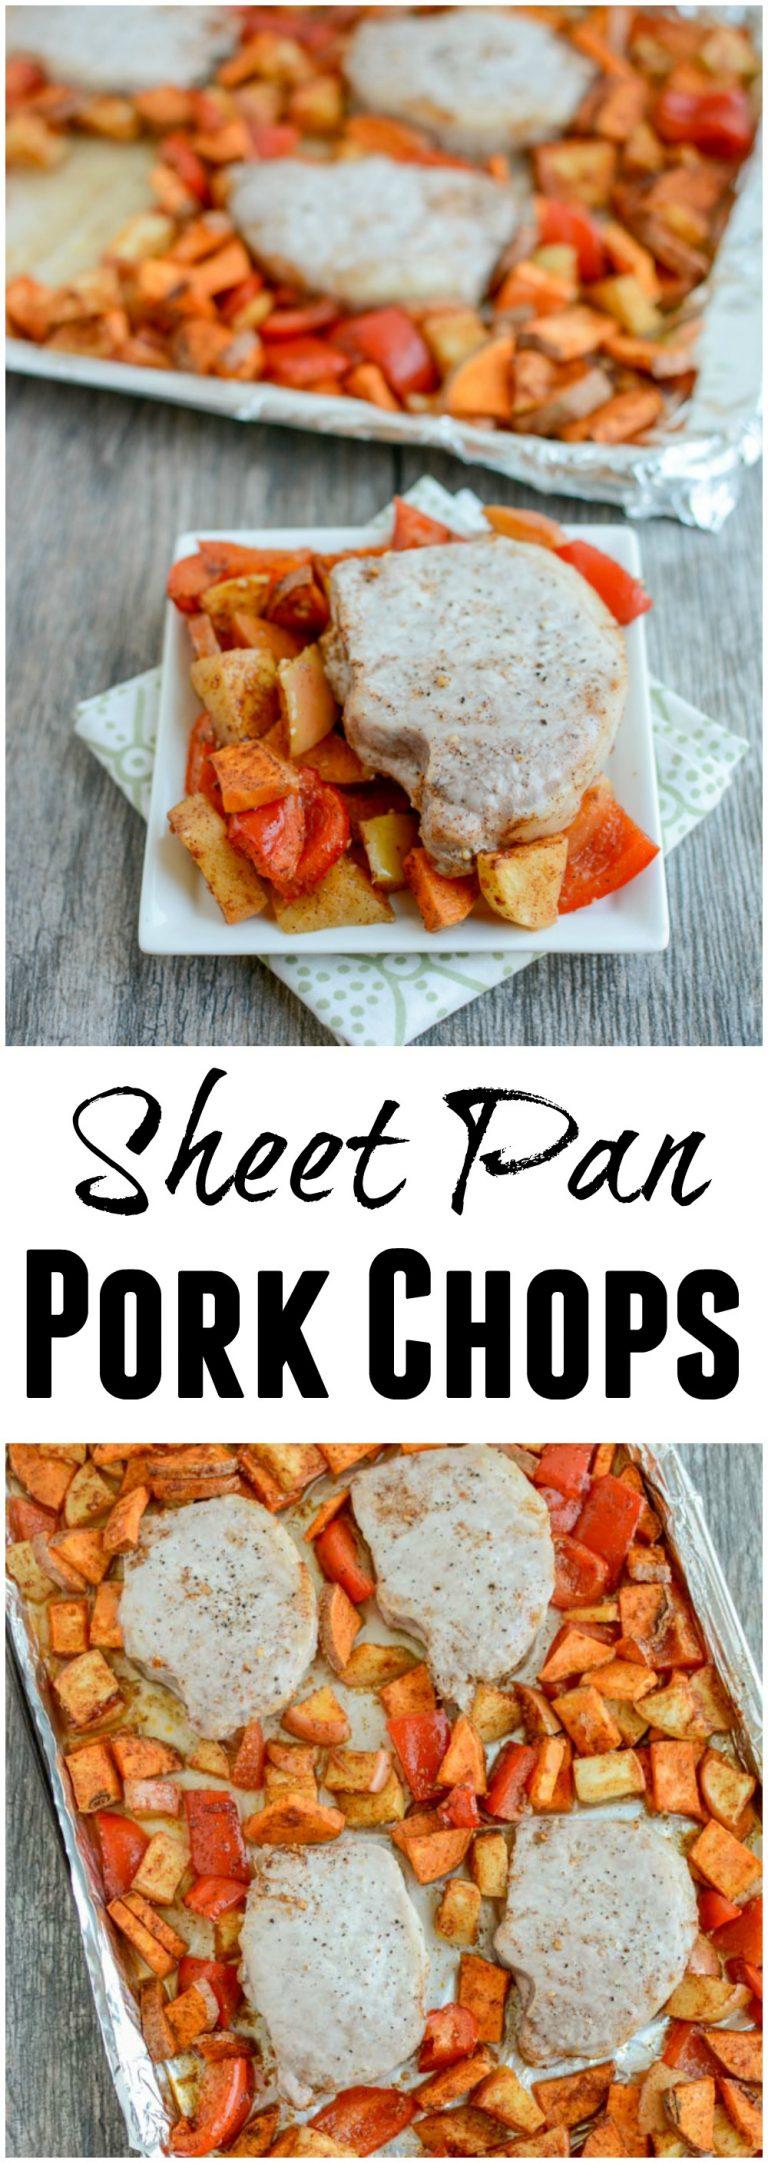 Sheet Pan Pork Chops with Sweet Potatoes and Apples